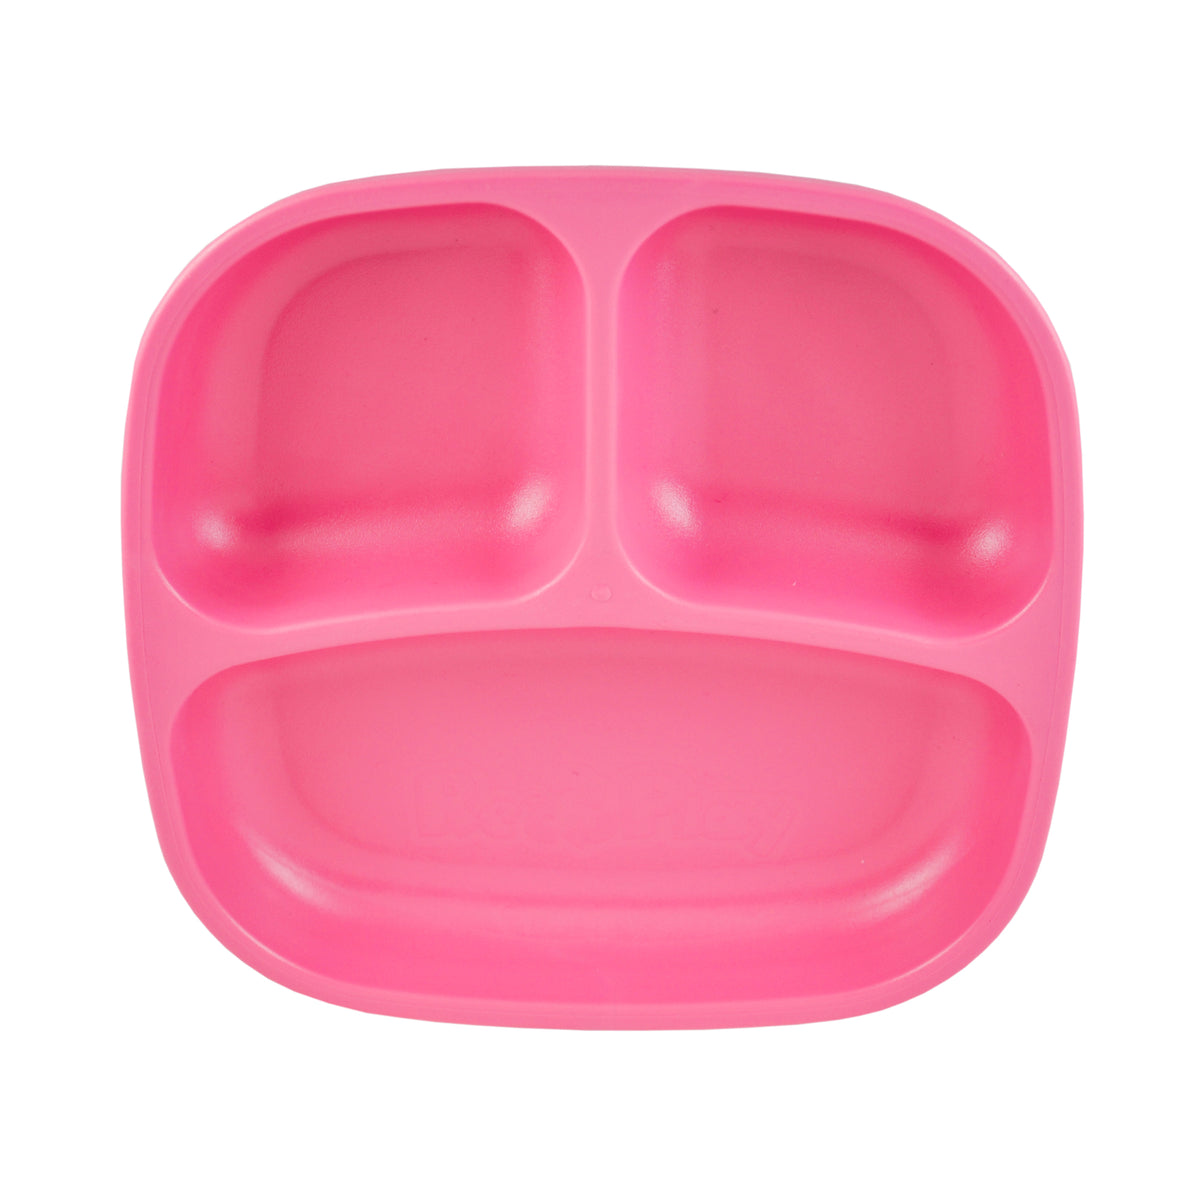 7" Divided Plate - Bright Pink